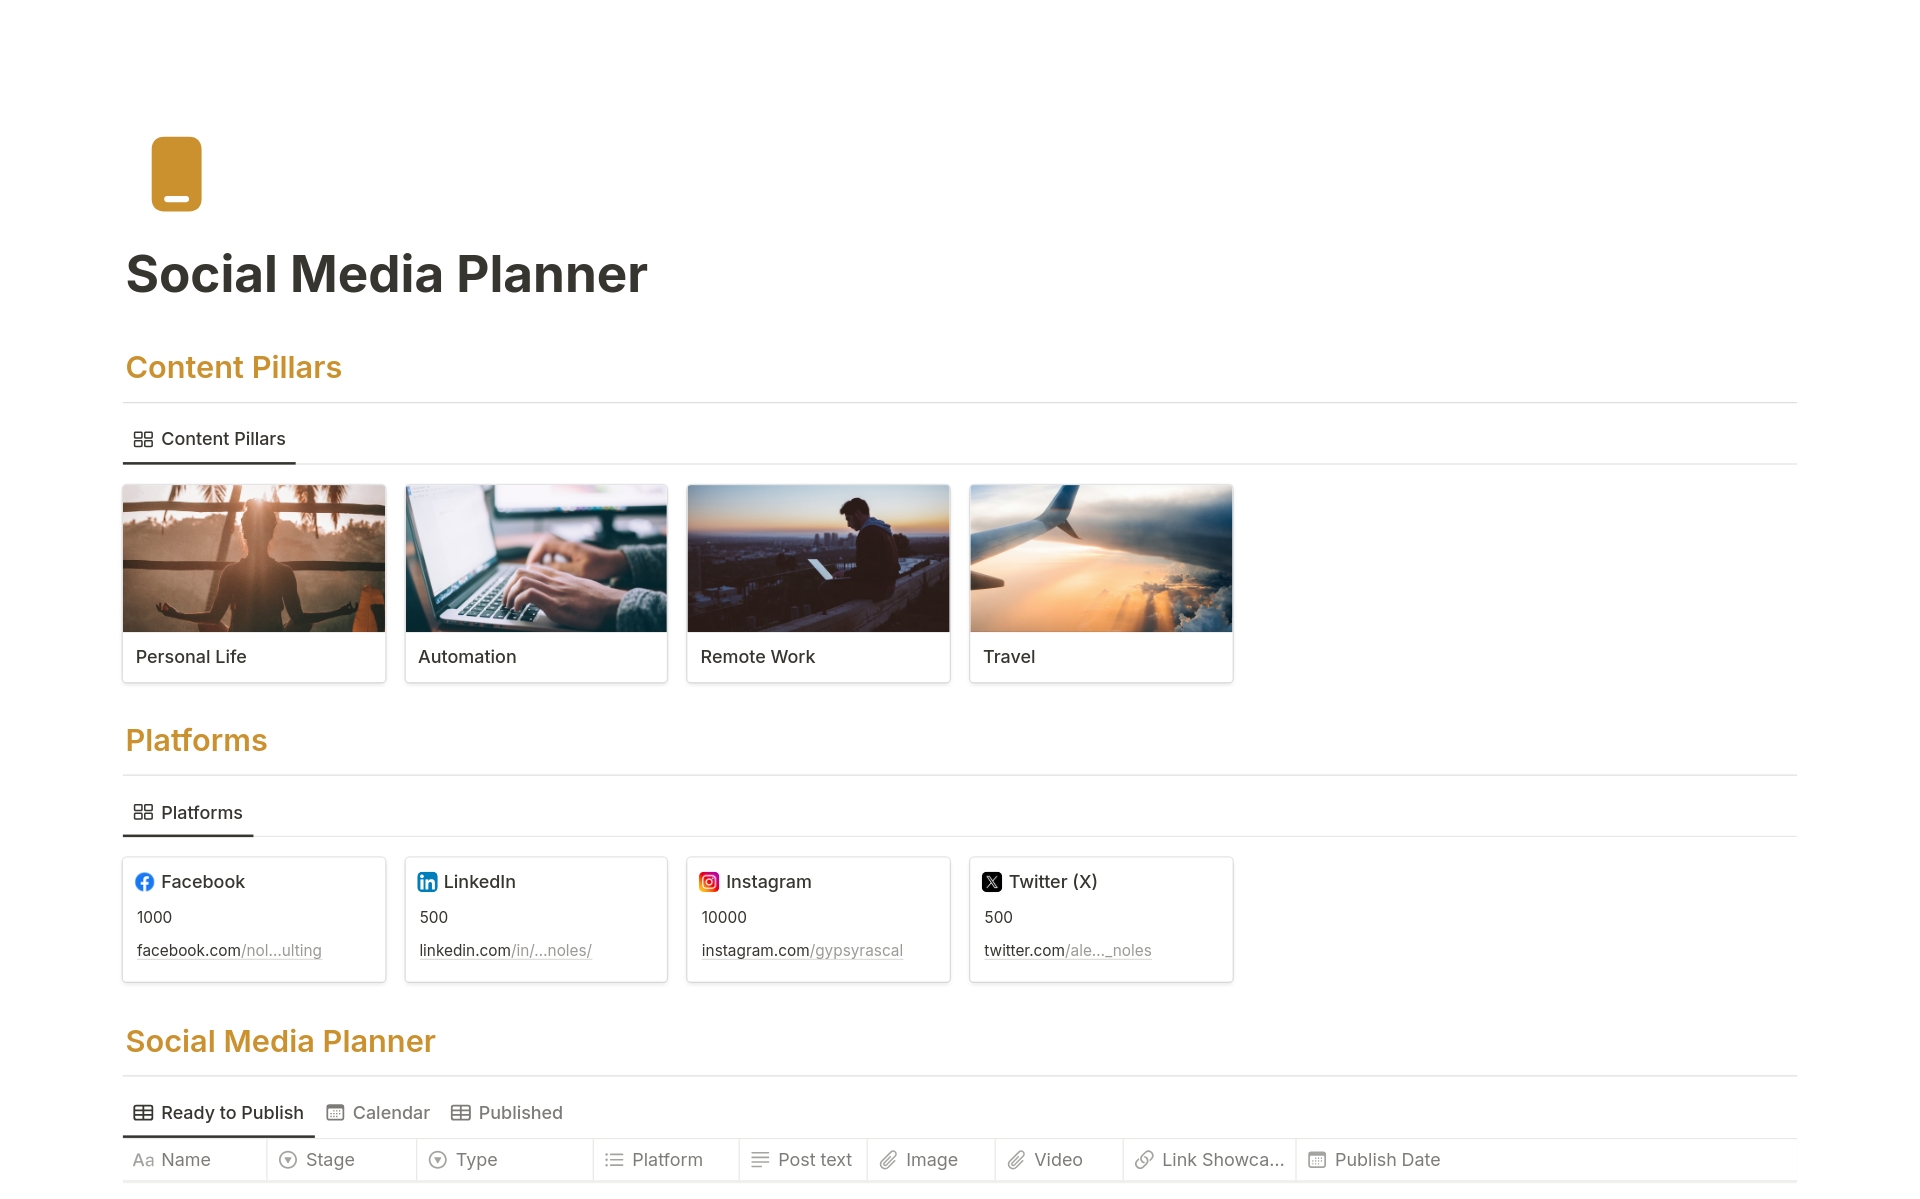 Better manage your social media and bring all of your social platforms into one tool.

Say goodbye to a scattered social schedule—now you can manage your social presence without the headaches.

This template offers everything you need to schedule, plan, and manage your content ef